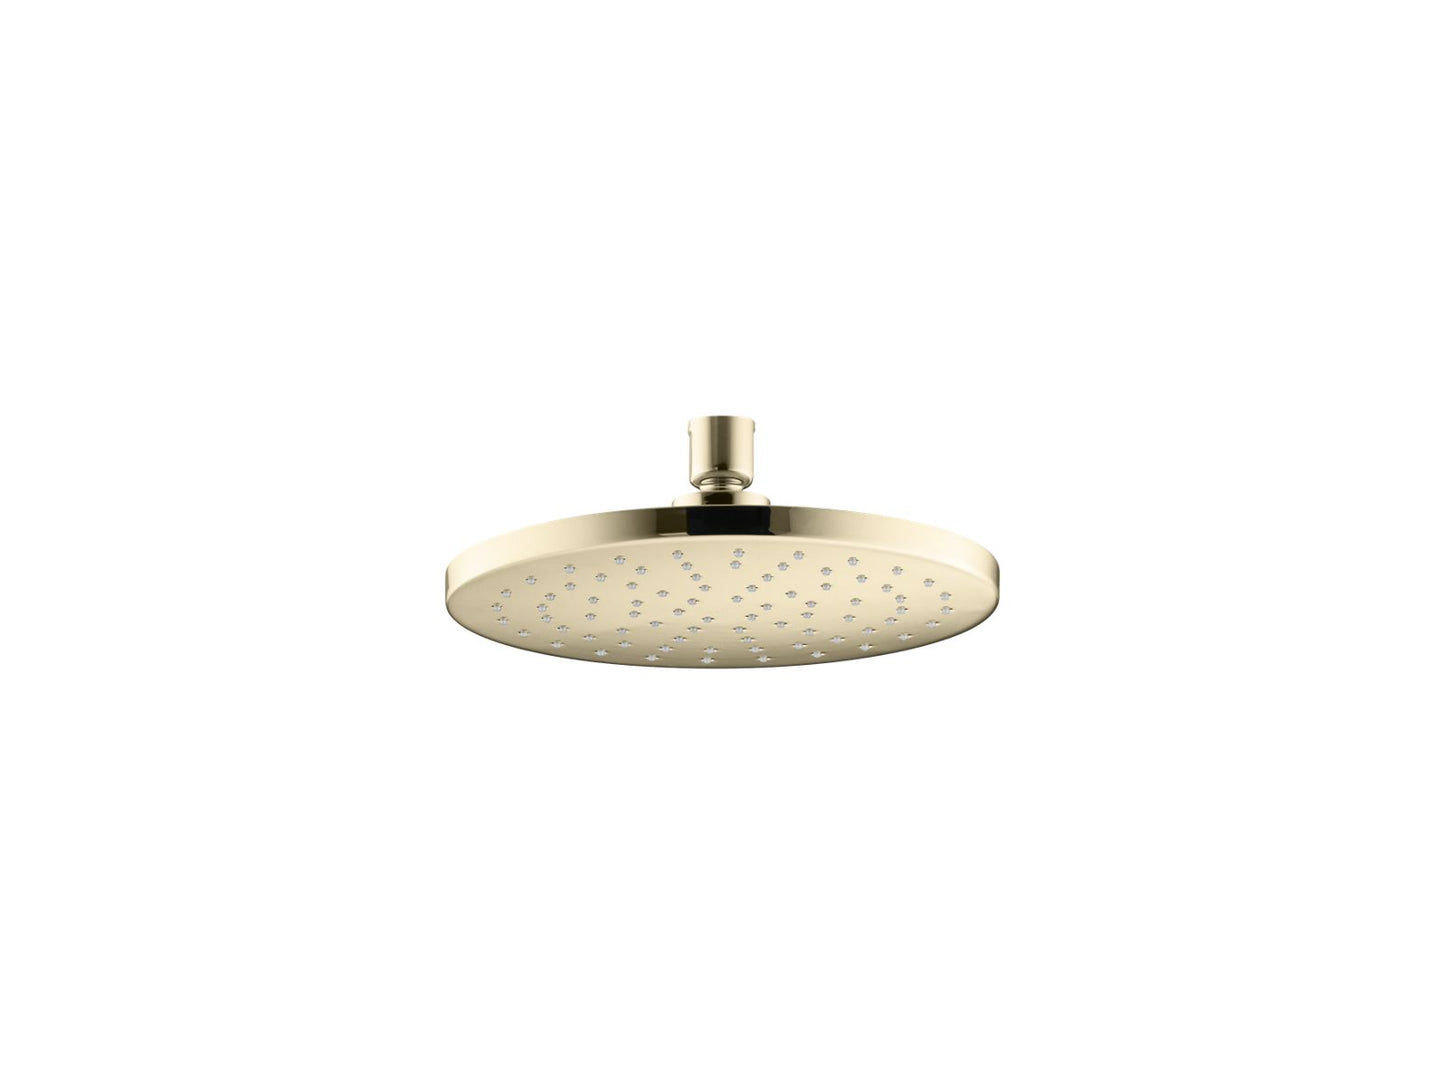 KOHLER K-13688-G-AF Contemporary Round 8" Single-Function Rainhead, 1.75 Gpm In Vibrant French Gold